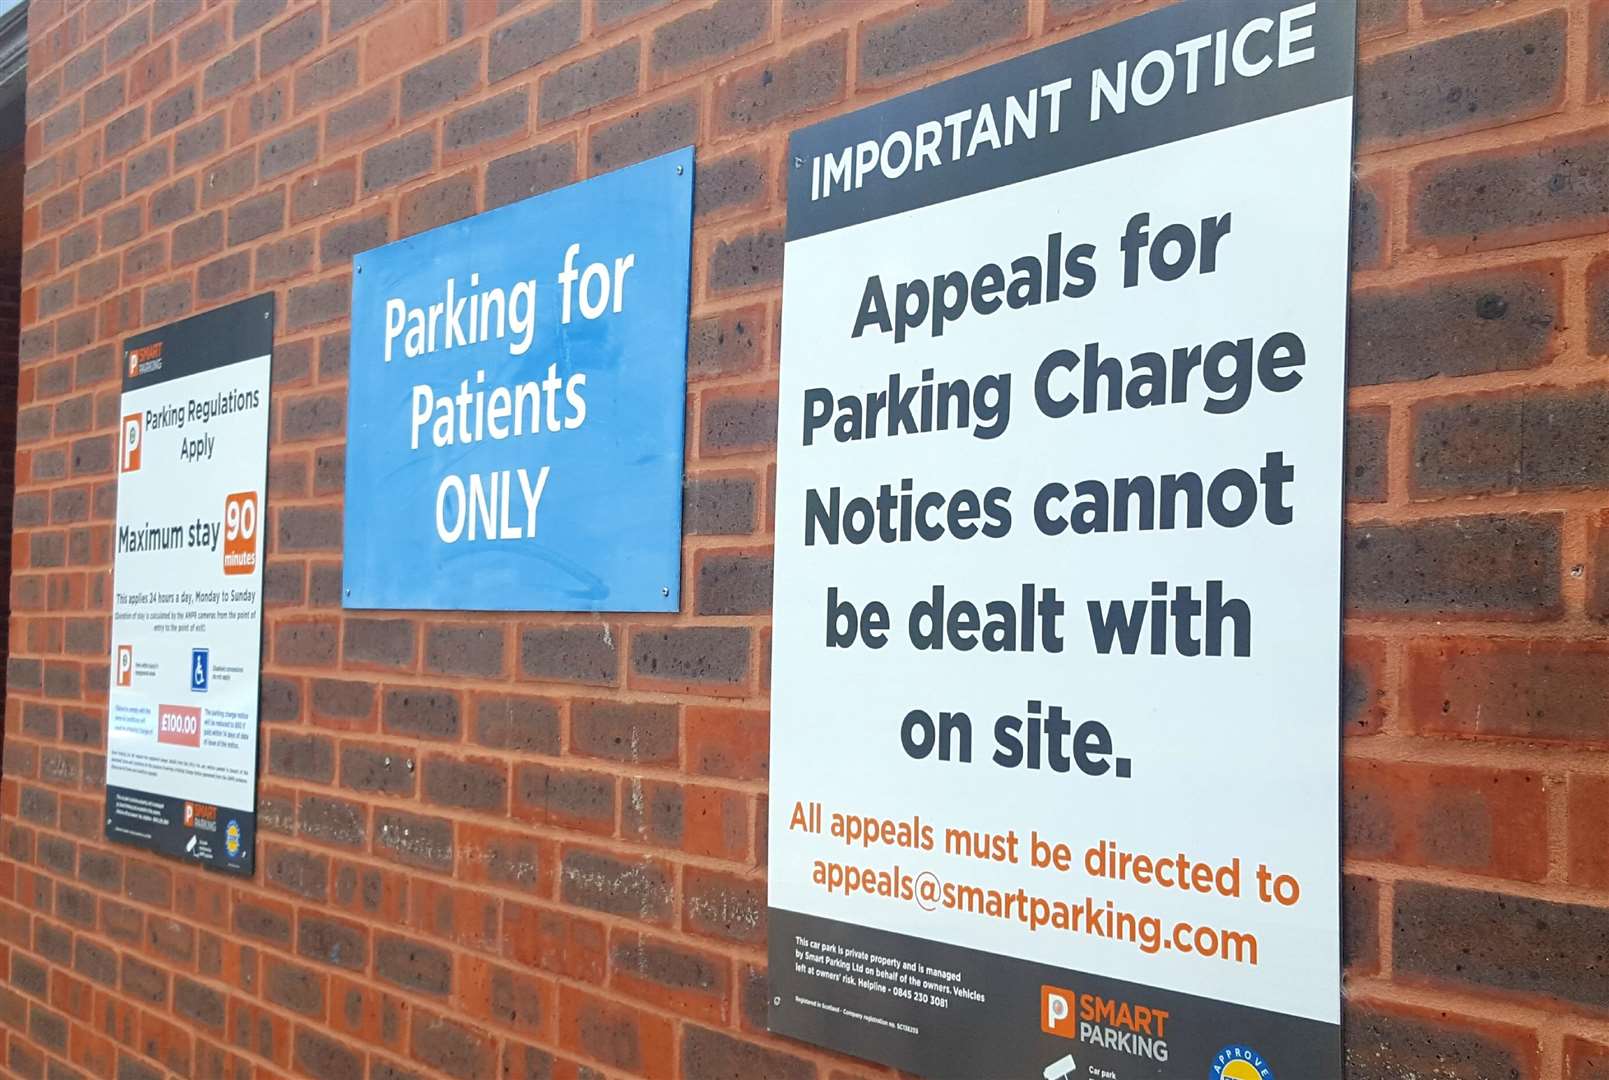 Signs at Canterbury Health Center warn about parking rules (2590822)